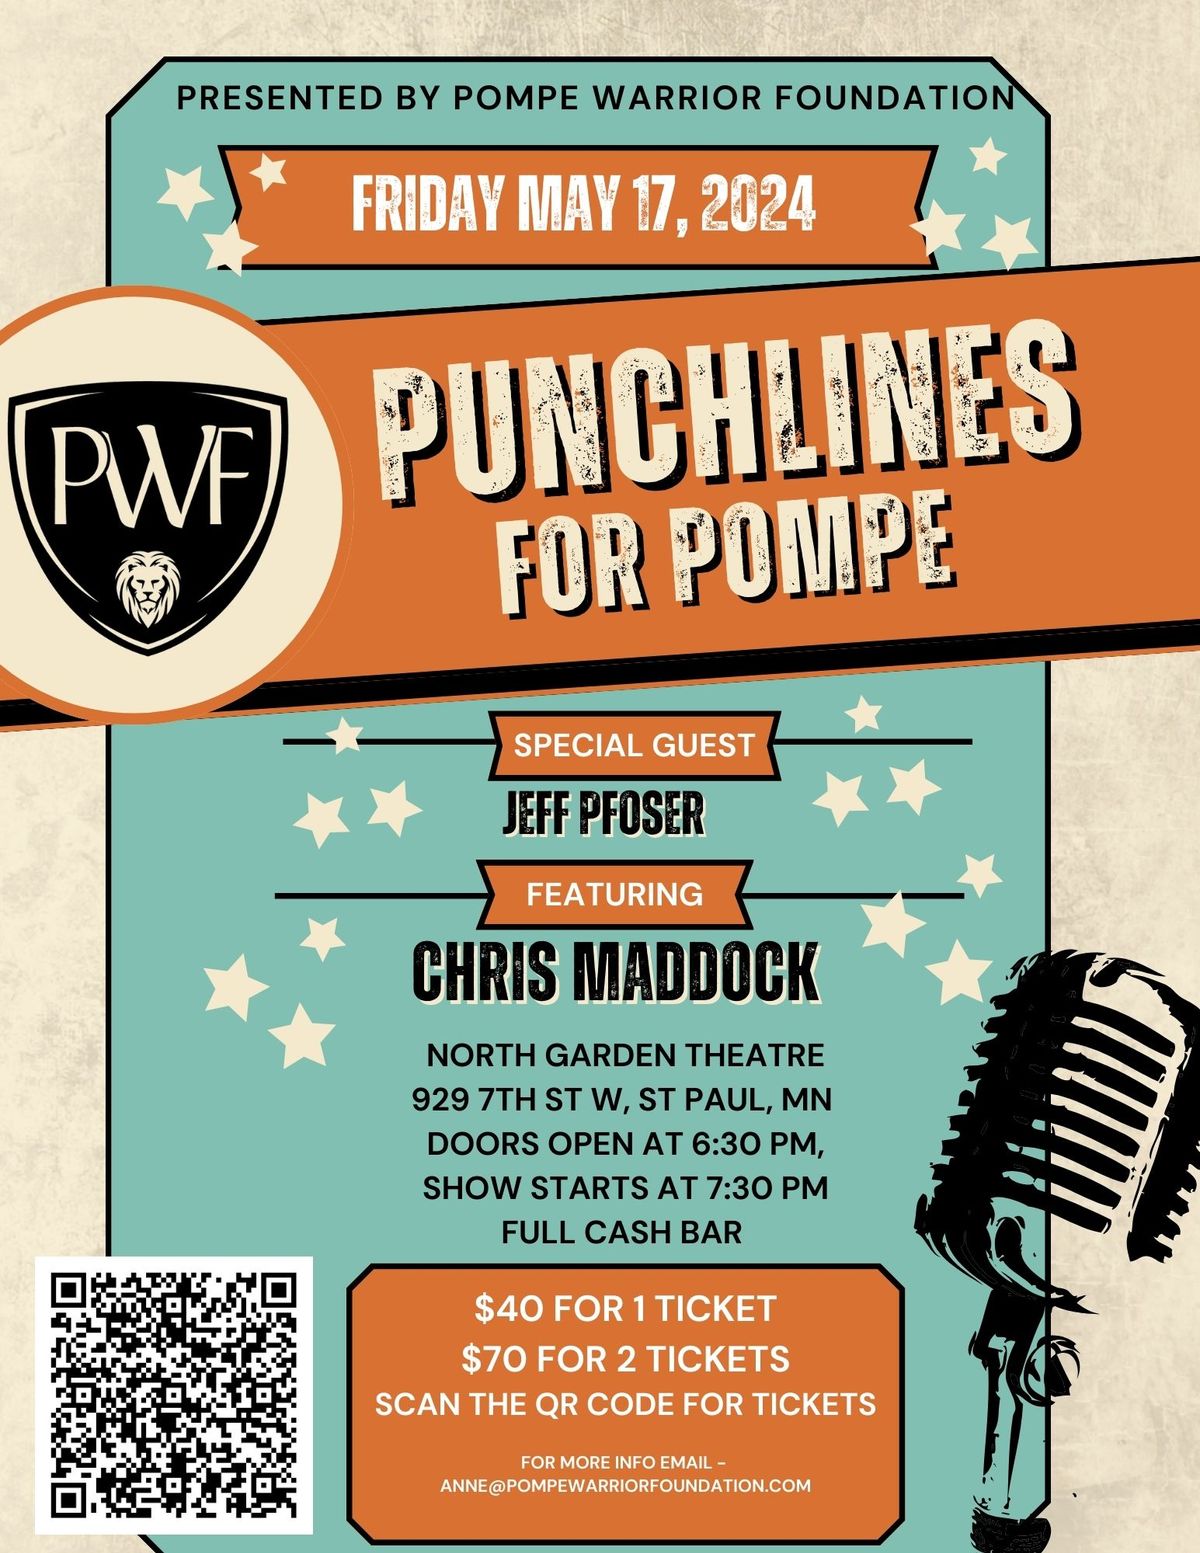 PWF Presents - Punchlines for Pompe